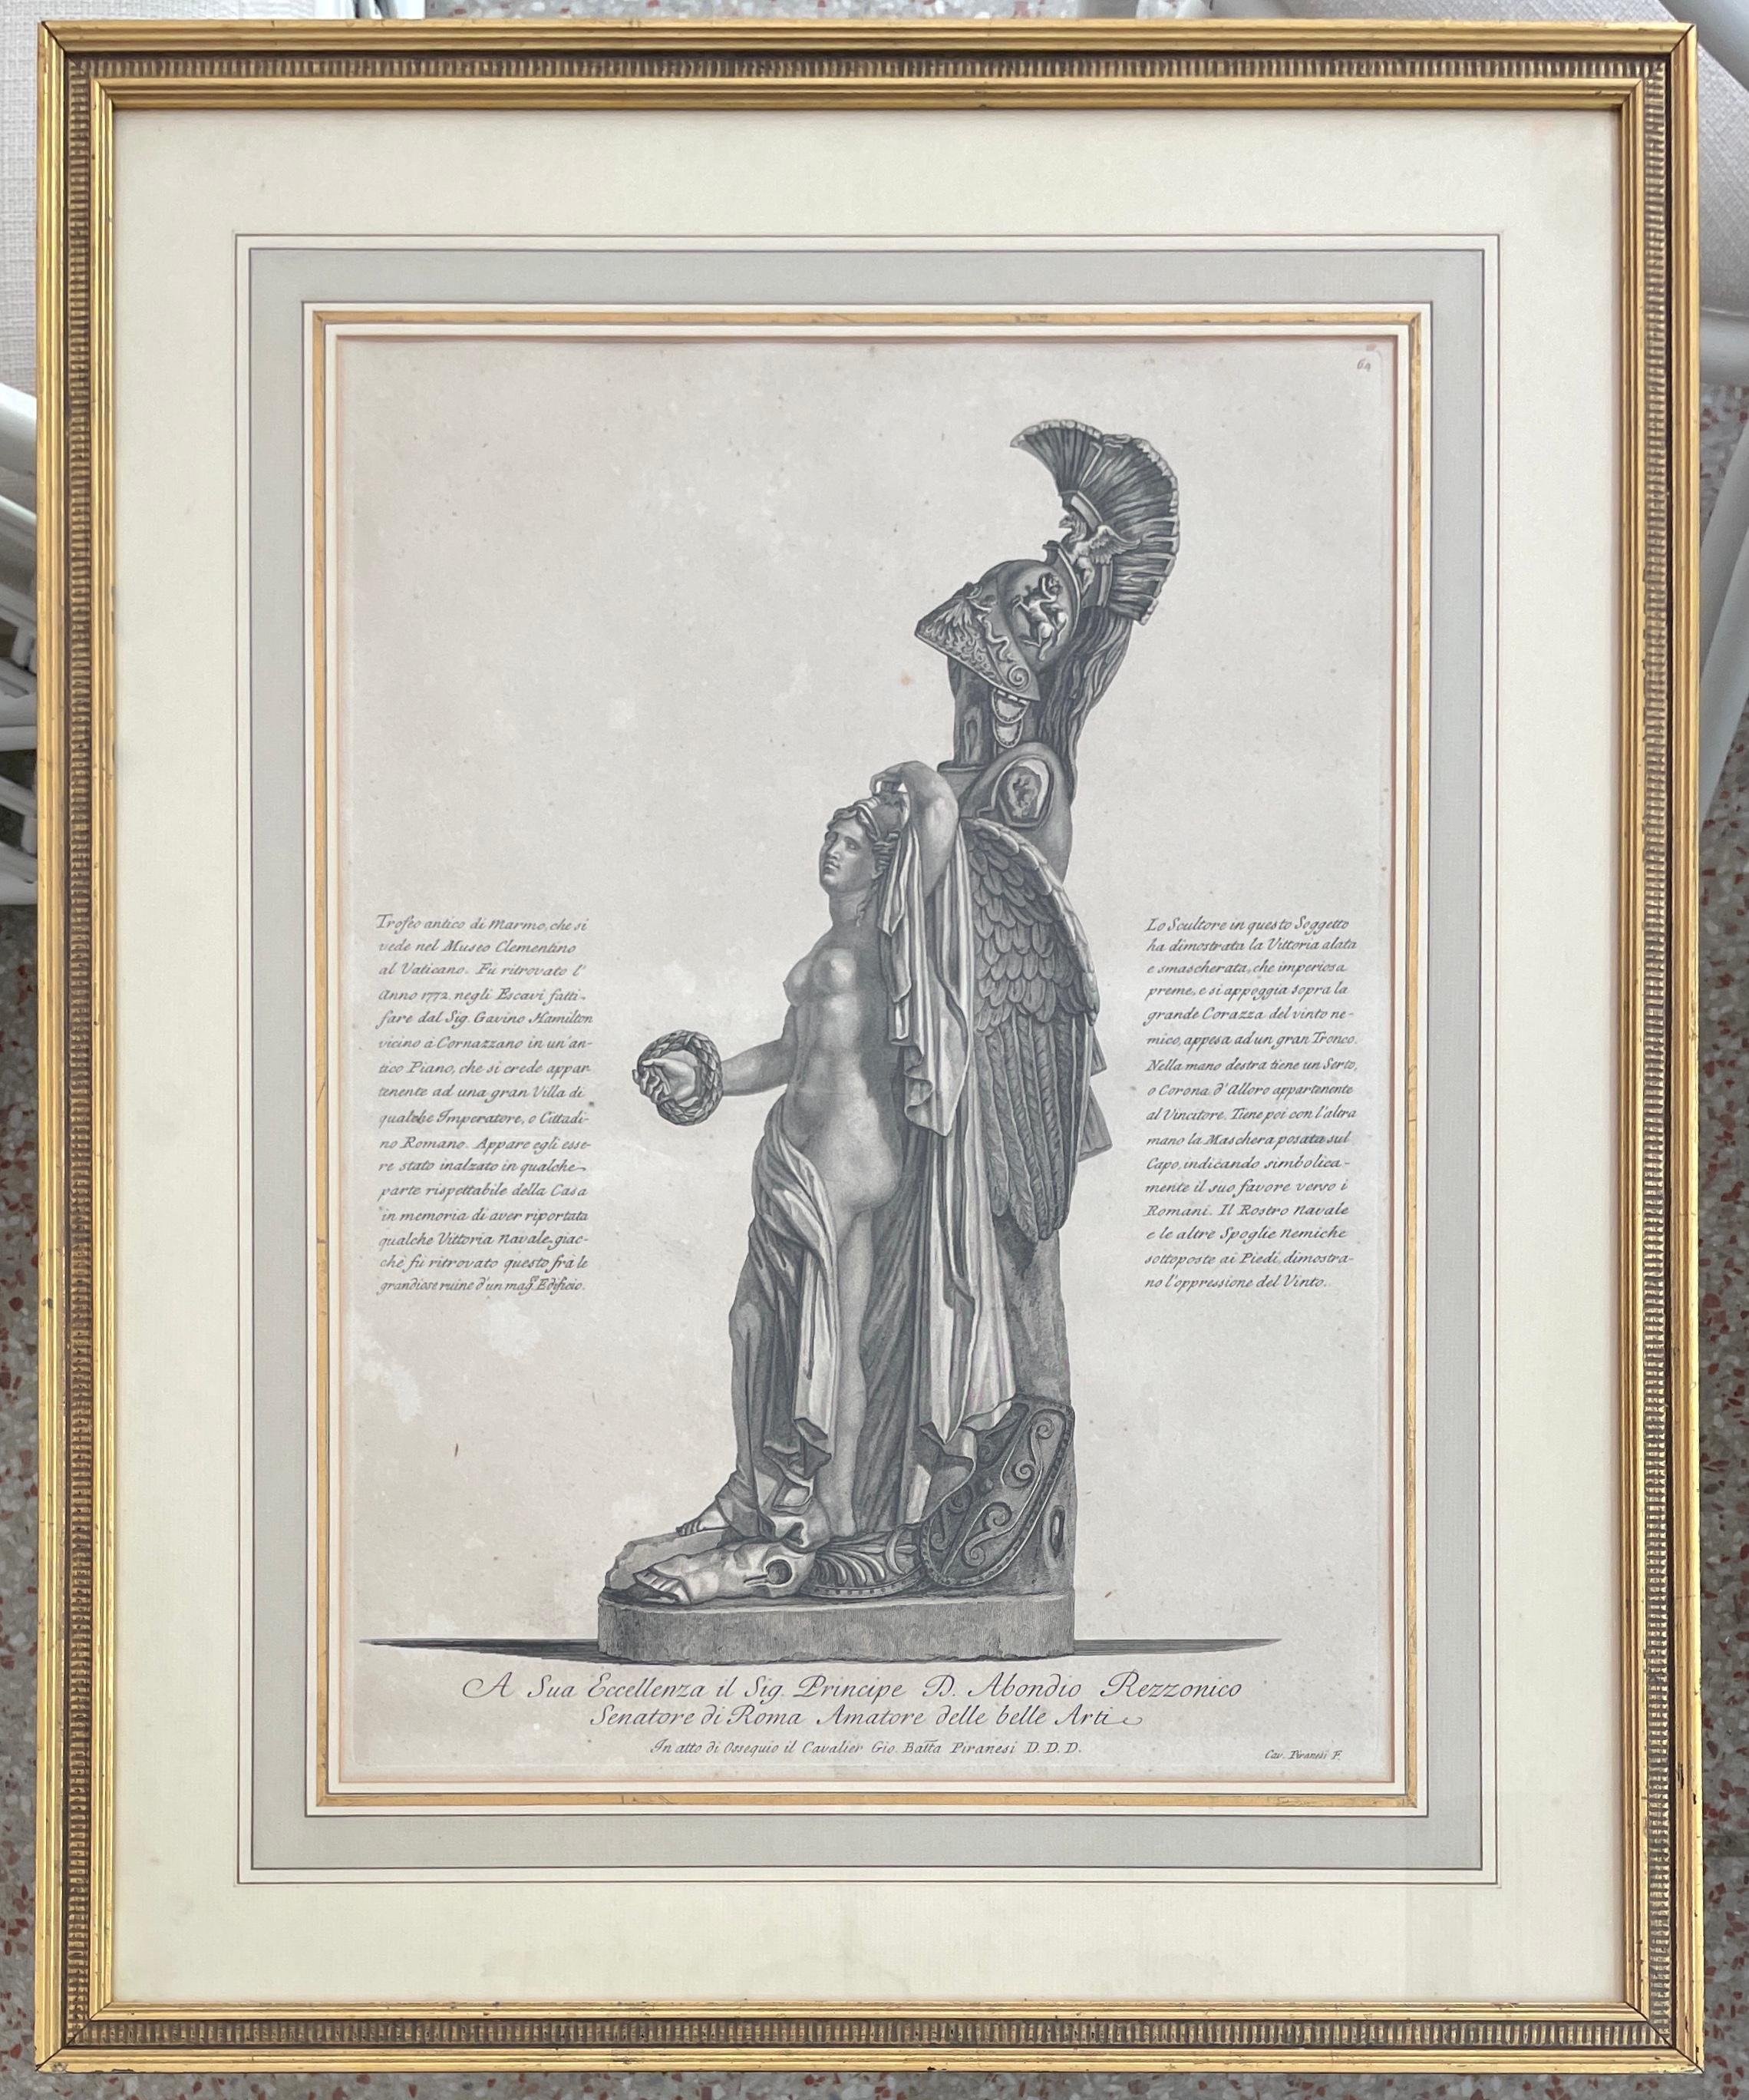 Beautiful etching of a Vatican sculpture by Italian artist Piranesi. Great addition to your architectural and classic inspired interiors.